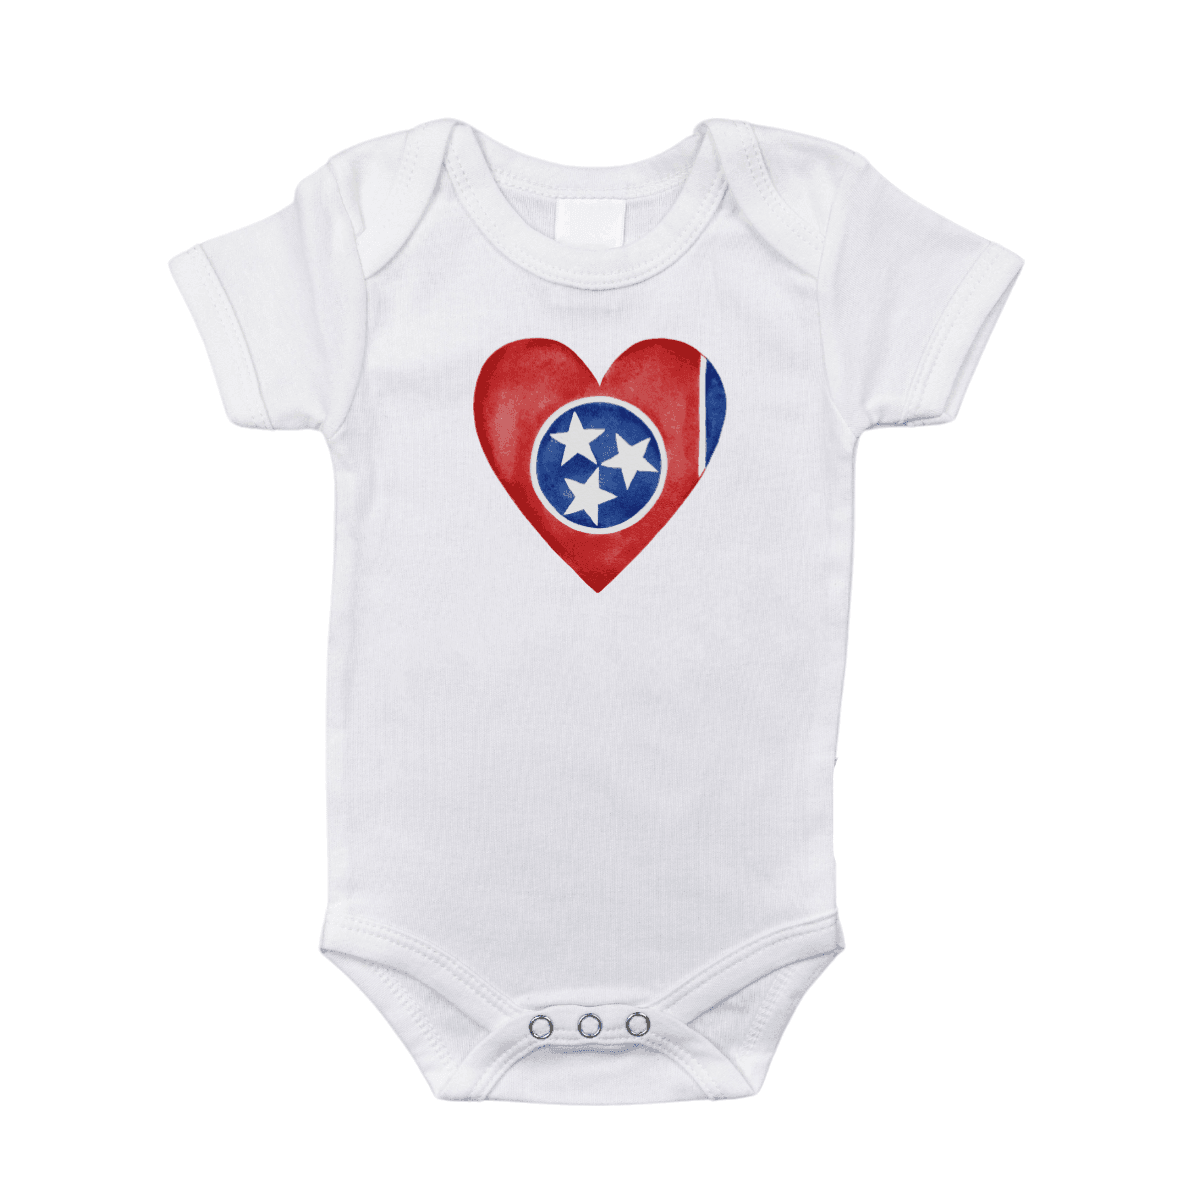 White baby onesie with a red heart and "Tennessee" text, evoking state pride and love for Tennessee.